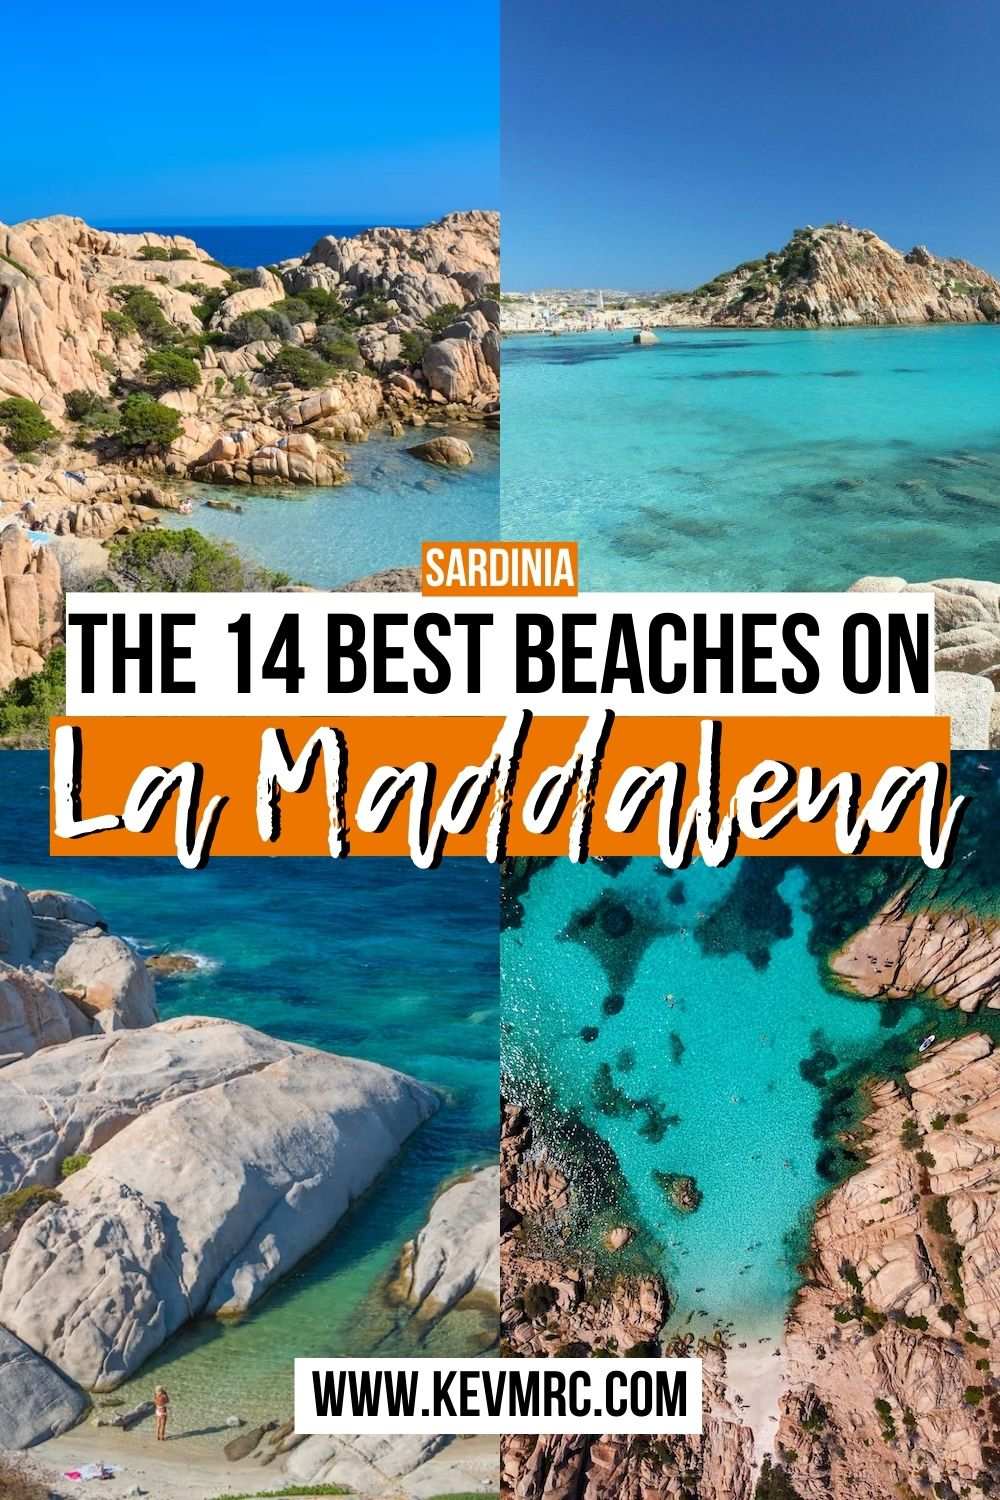 Looking for the most beautiful beaches on La Maddalena in Sardinia? Here are the 14 of the best La Maddalena beaches on this guide. sardinia la maddalena | la maddalena sardinia islands | sardinia italy beaches | best beaches in sardinia | sardinia beach beautiful places | best sardinia beaches #sardinia #lamaddalena